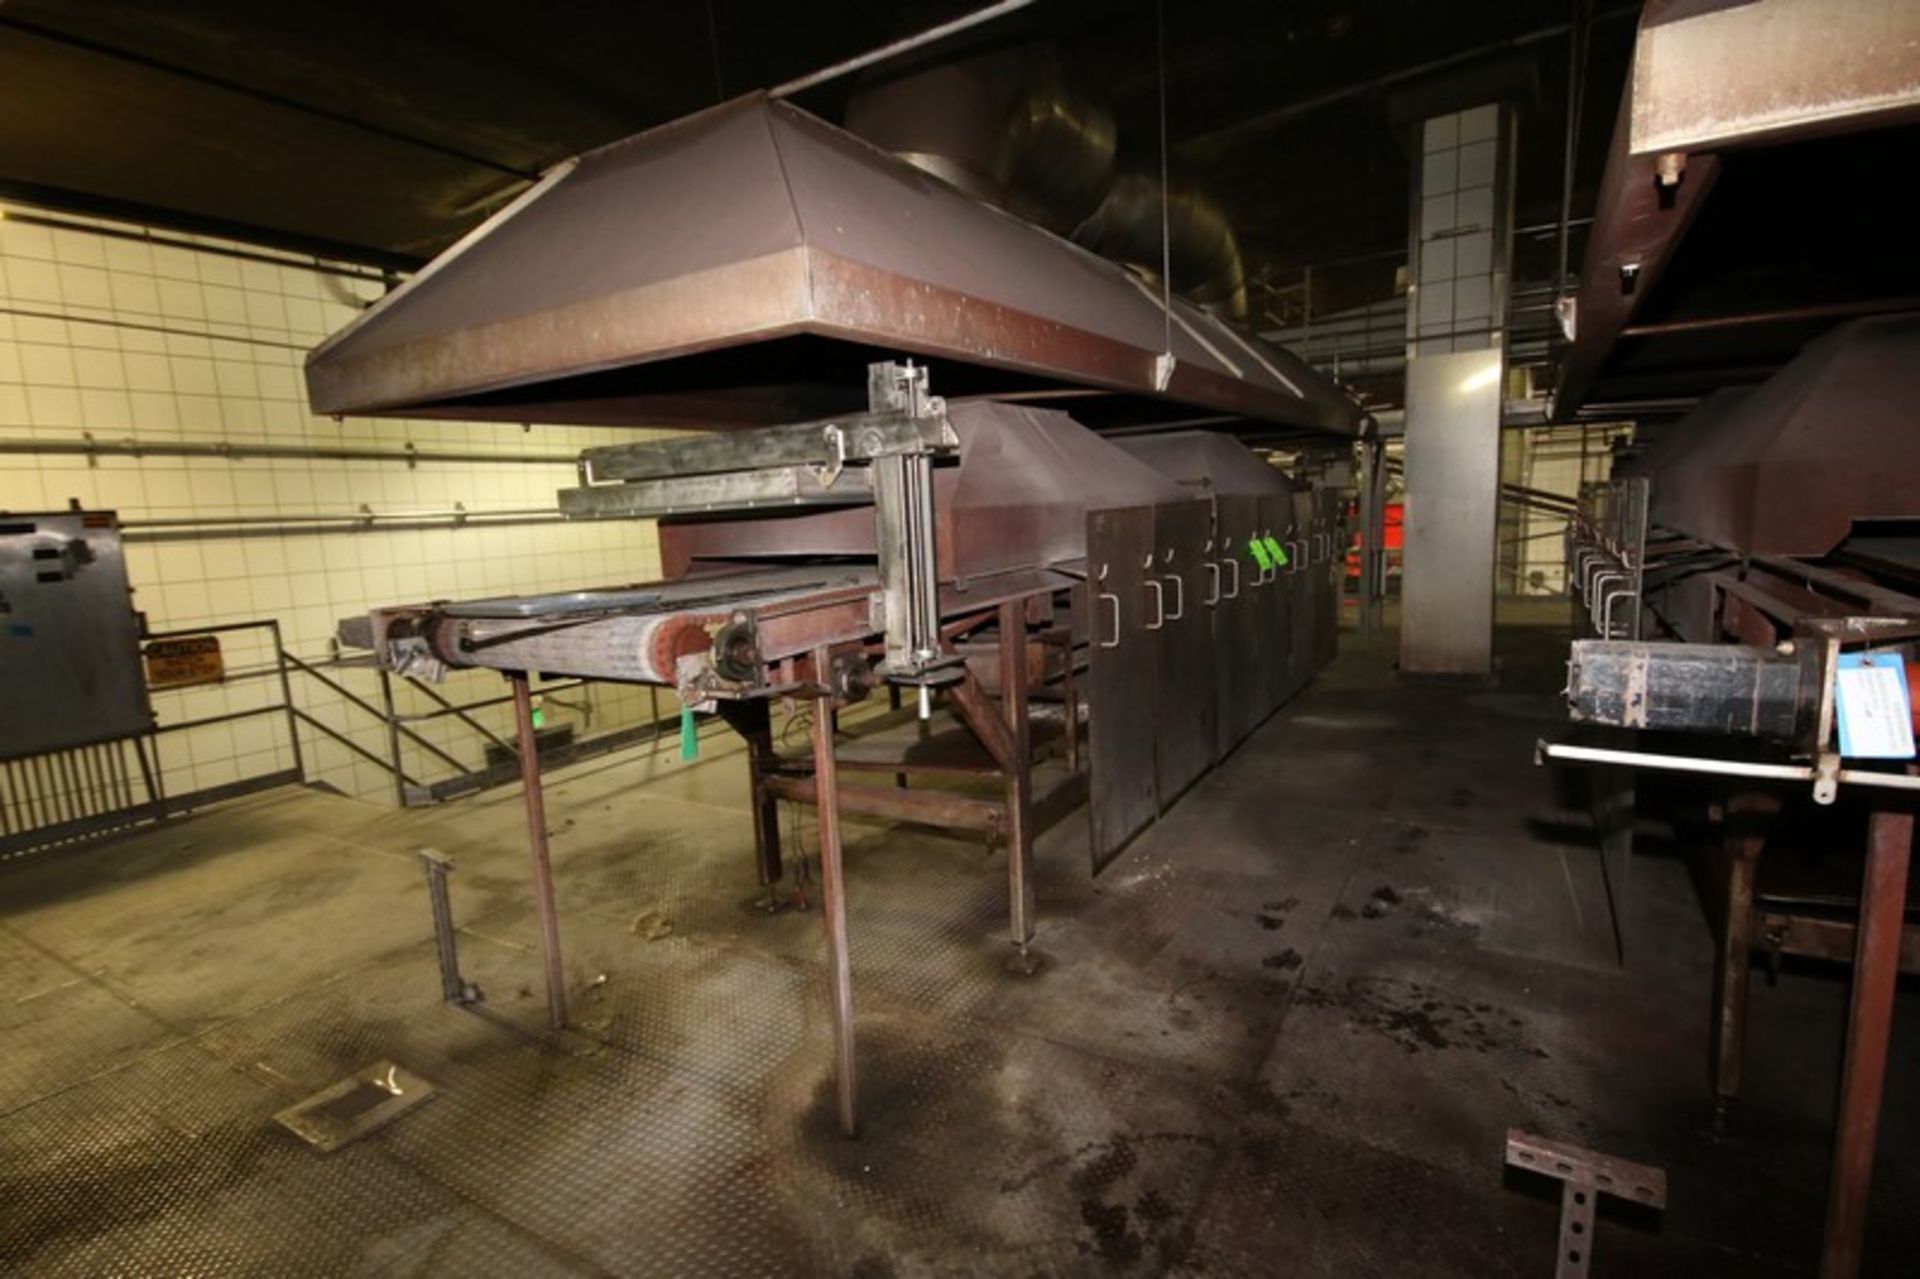 BULK BID: Key S/S Spreader Shaker Feed System, with Natural Gas Roaster #6, Includes Lots 20 & 21